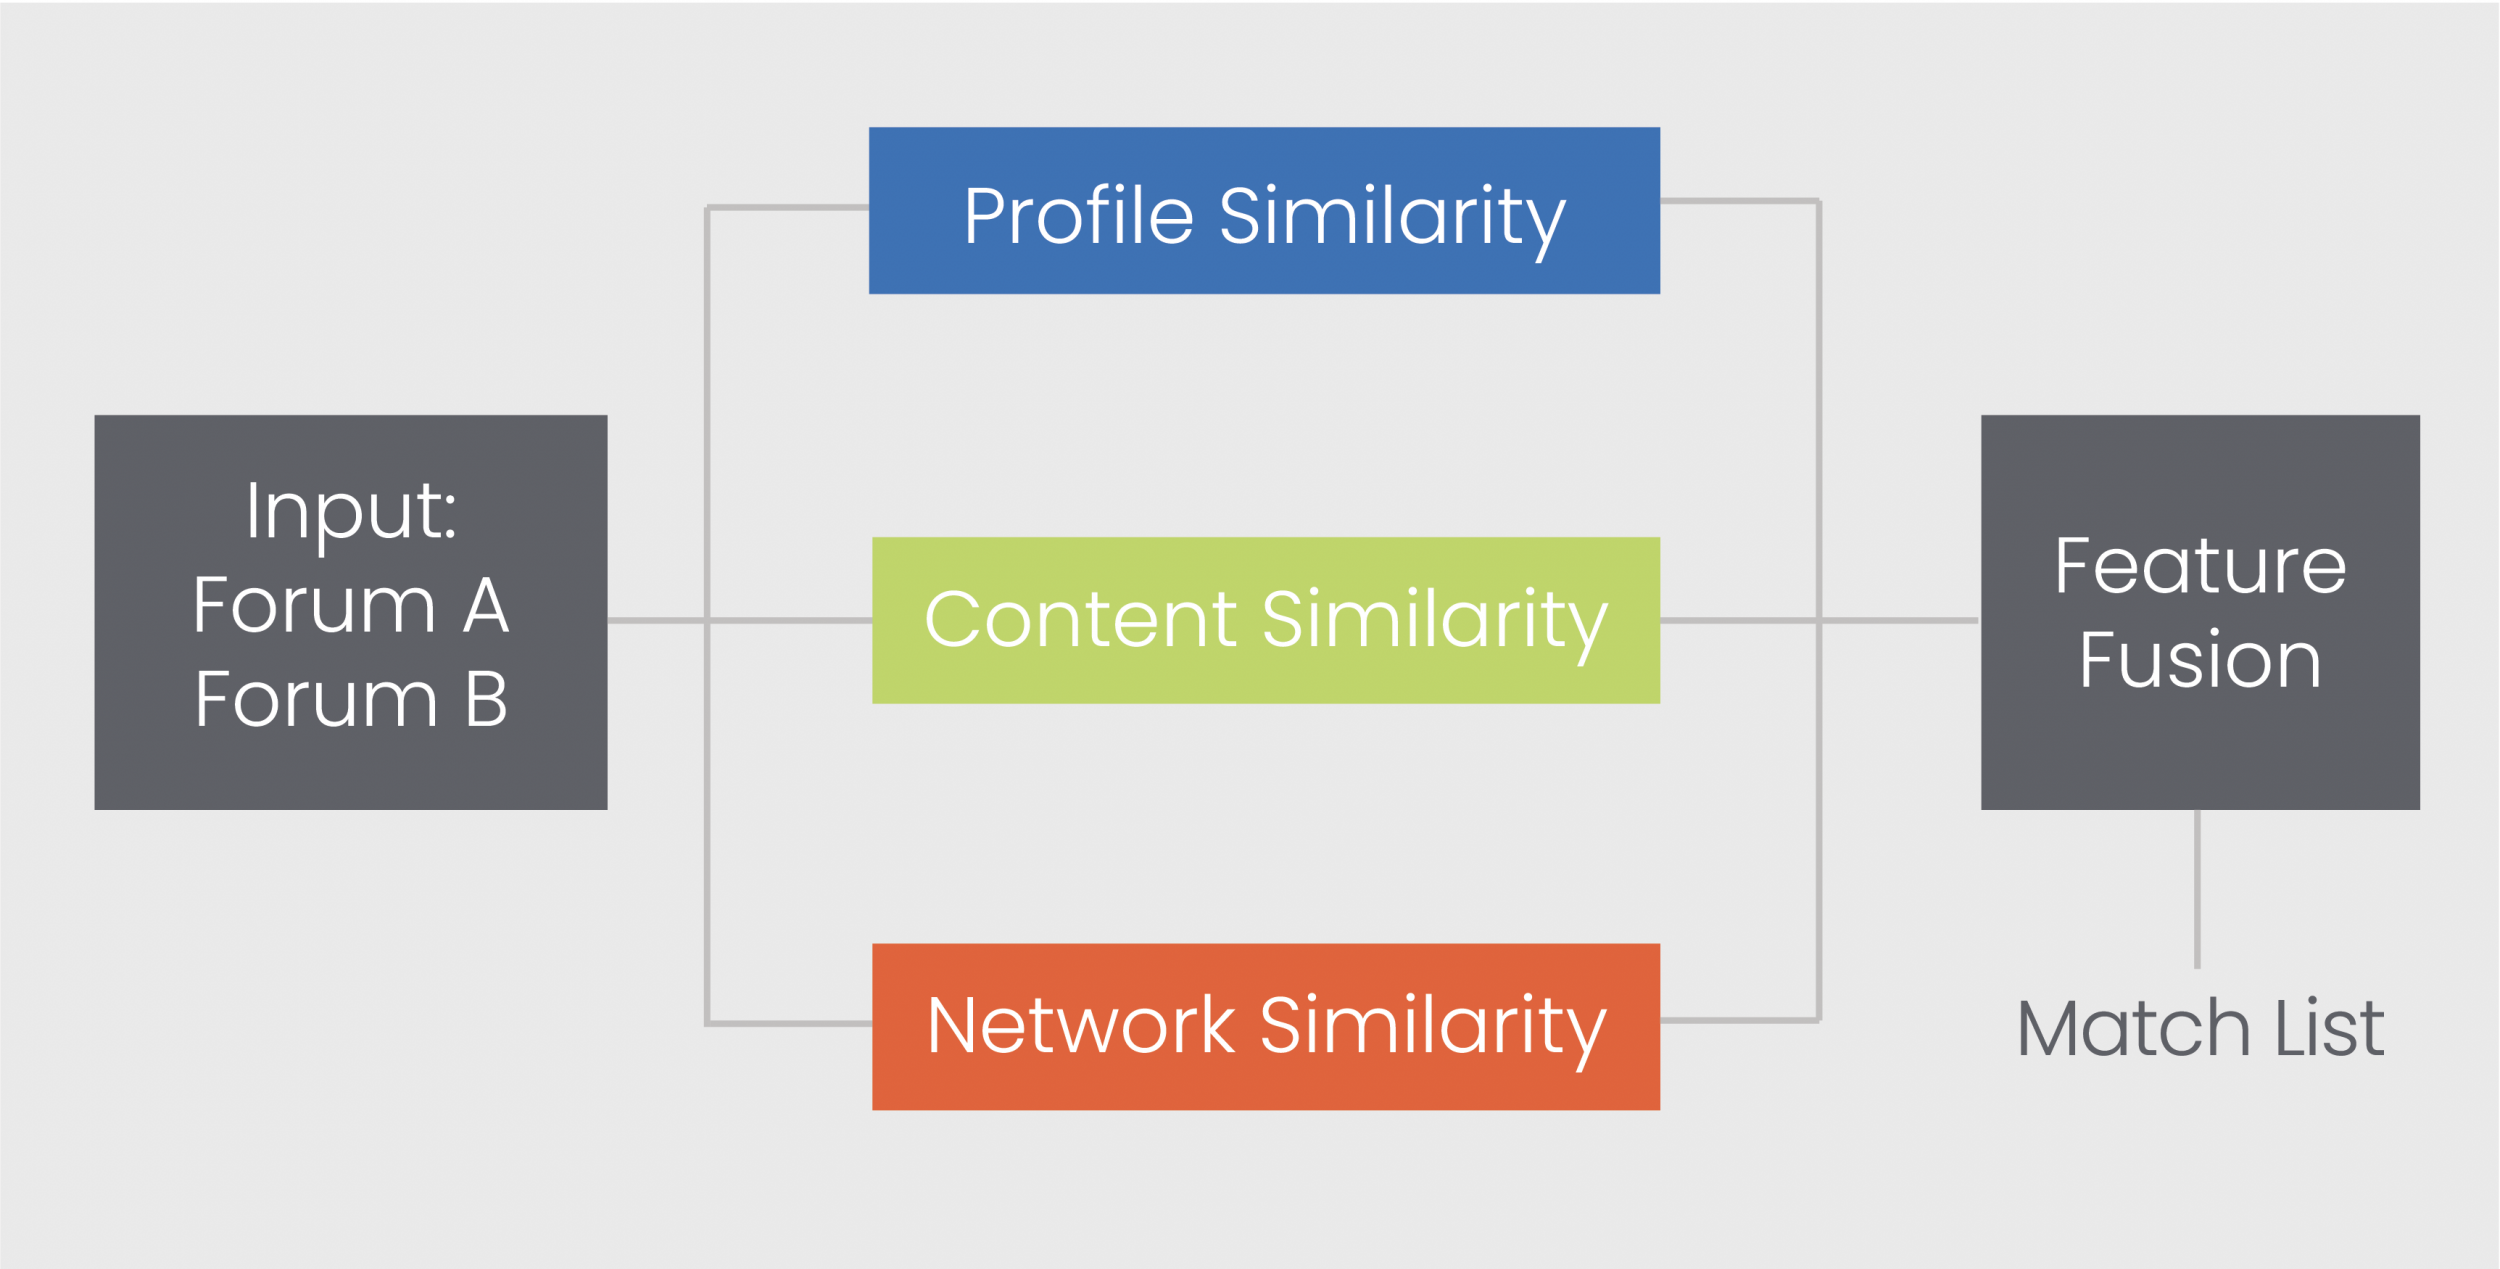 A flow chart shows how input data is scanned for profile, content, and network similarity and is then fused into a match list.